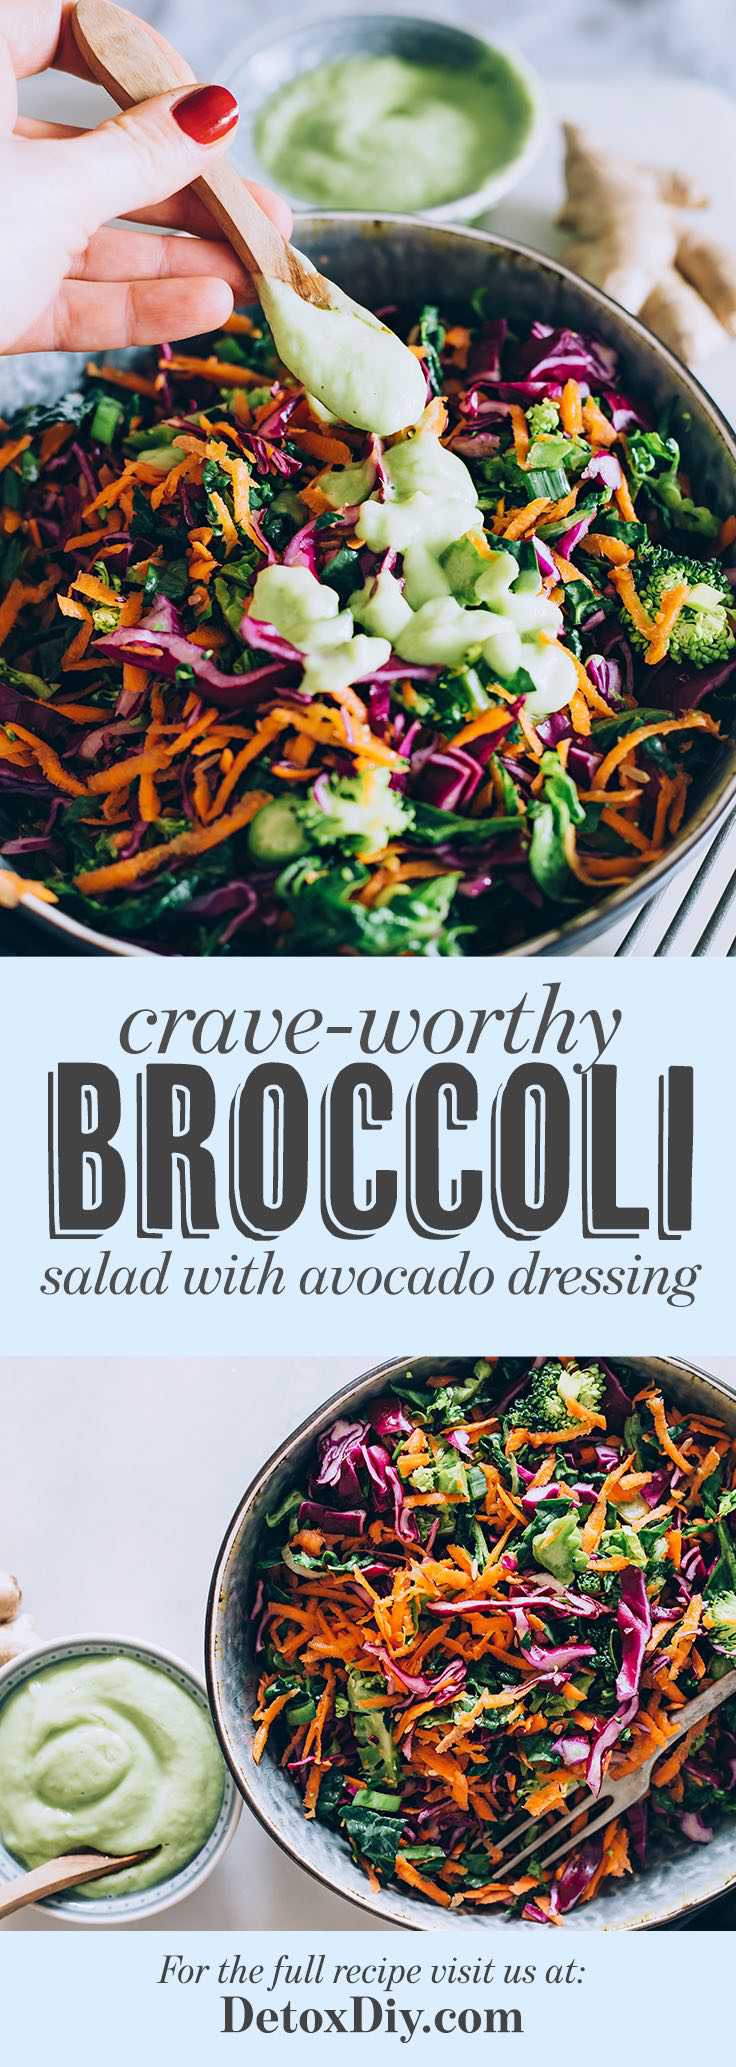 This broccoli salad with homemade avocado dressing is the best!